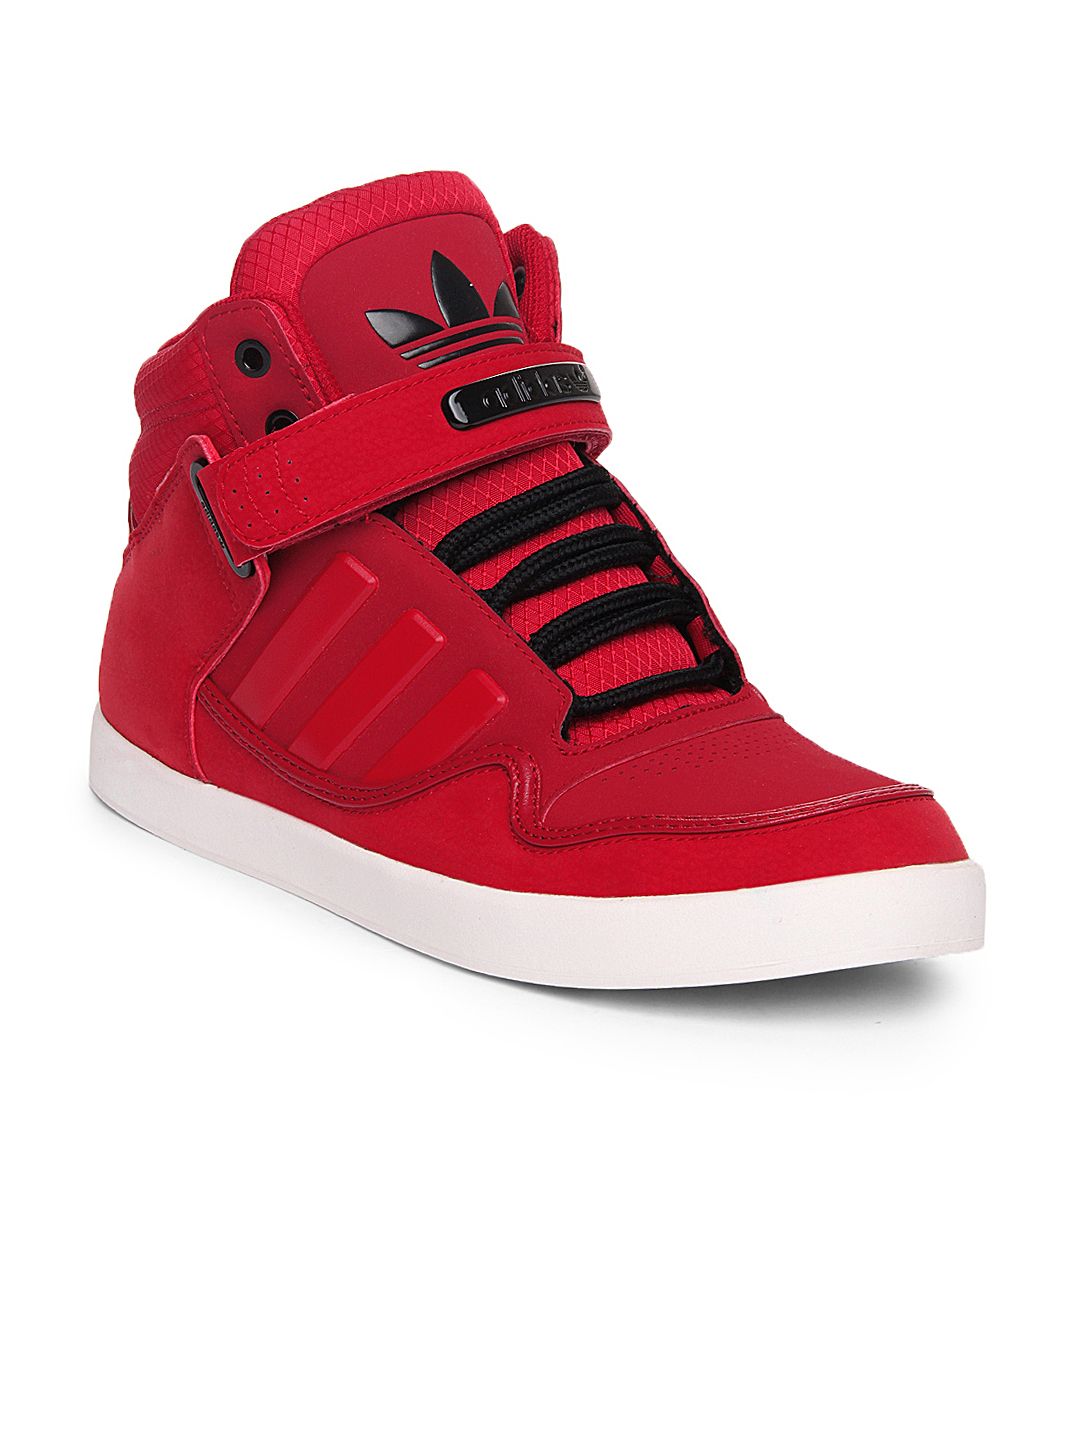 Red adidas high tops : WhatsThisShoe